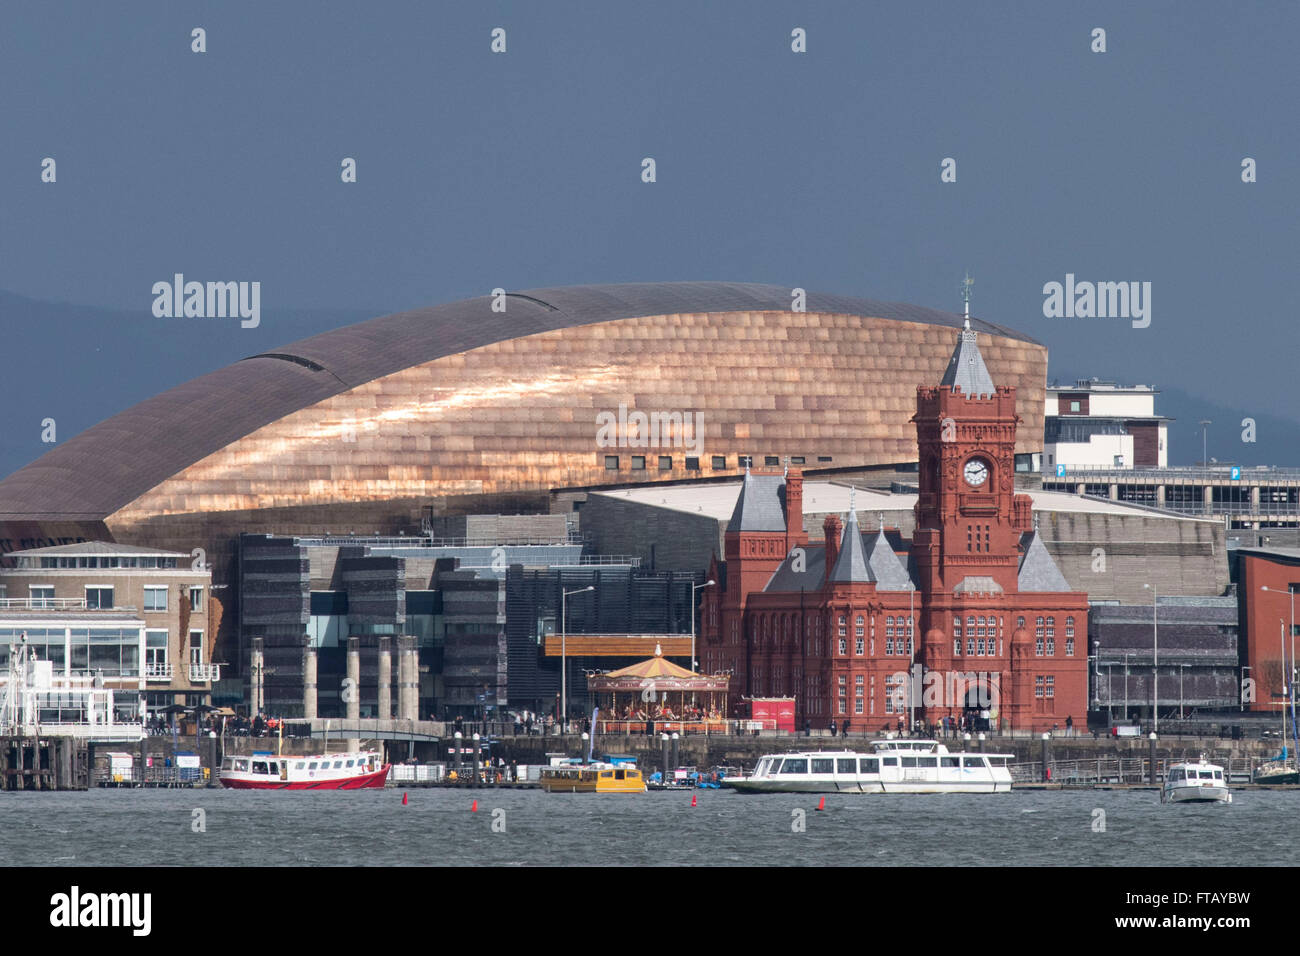 The Pierhead building and Wales Millennium Centre (WMC) at Cardiff Bay, south Wales, UK. Stock Photo